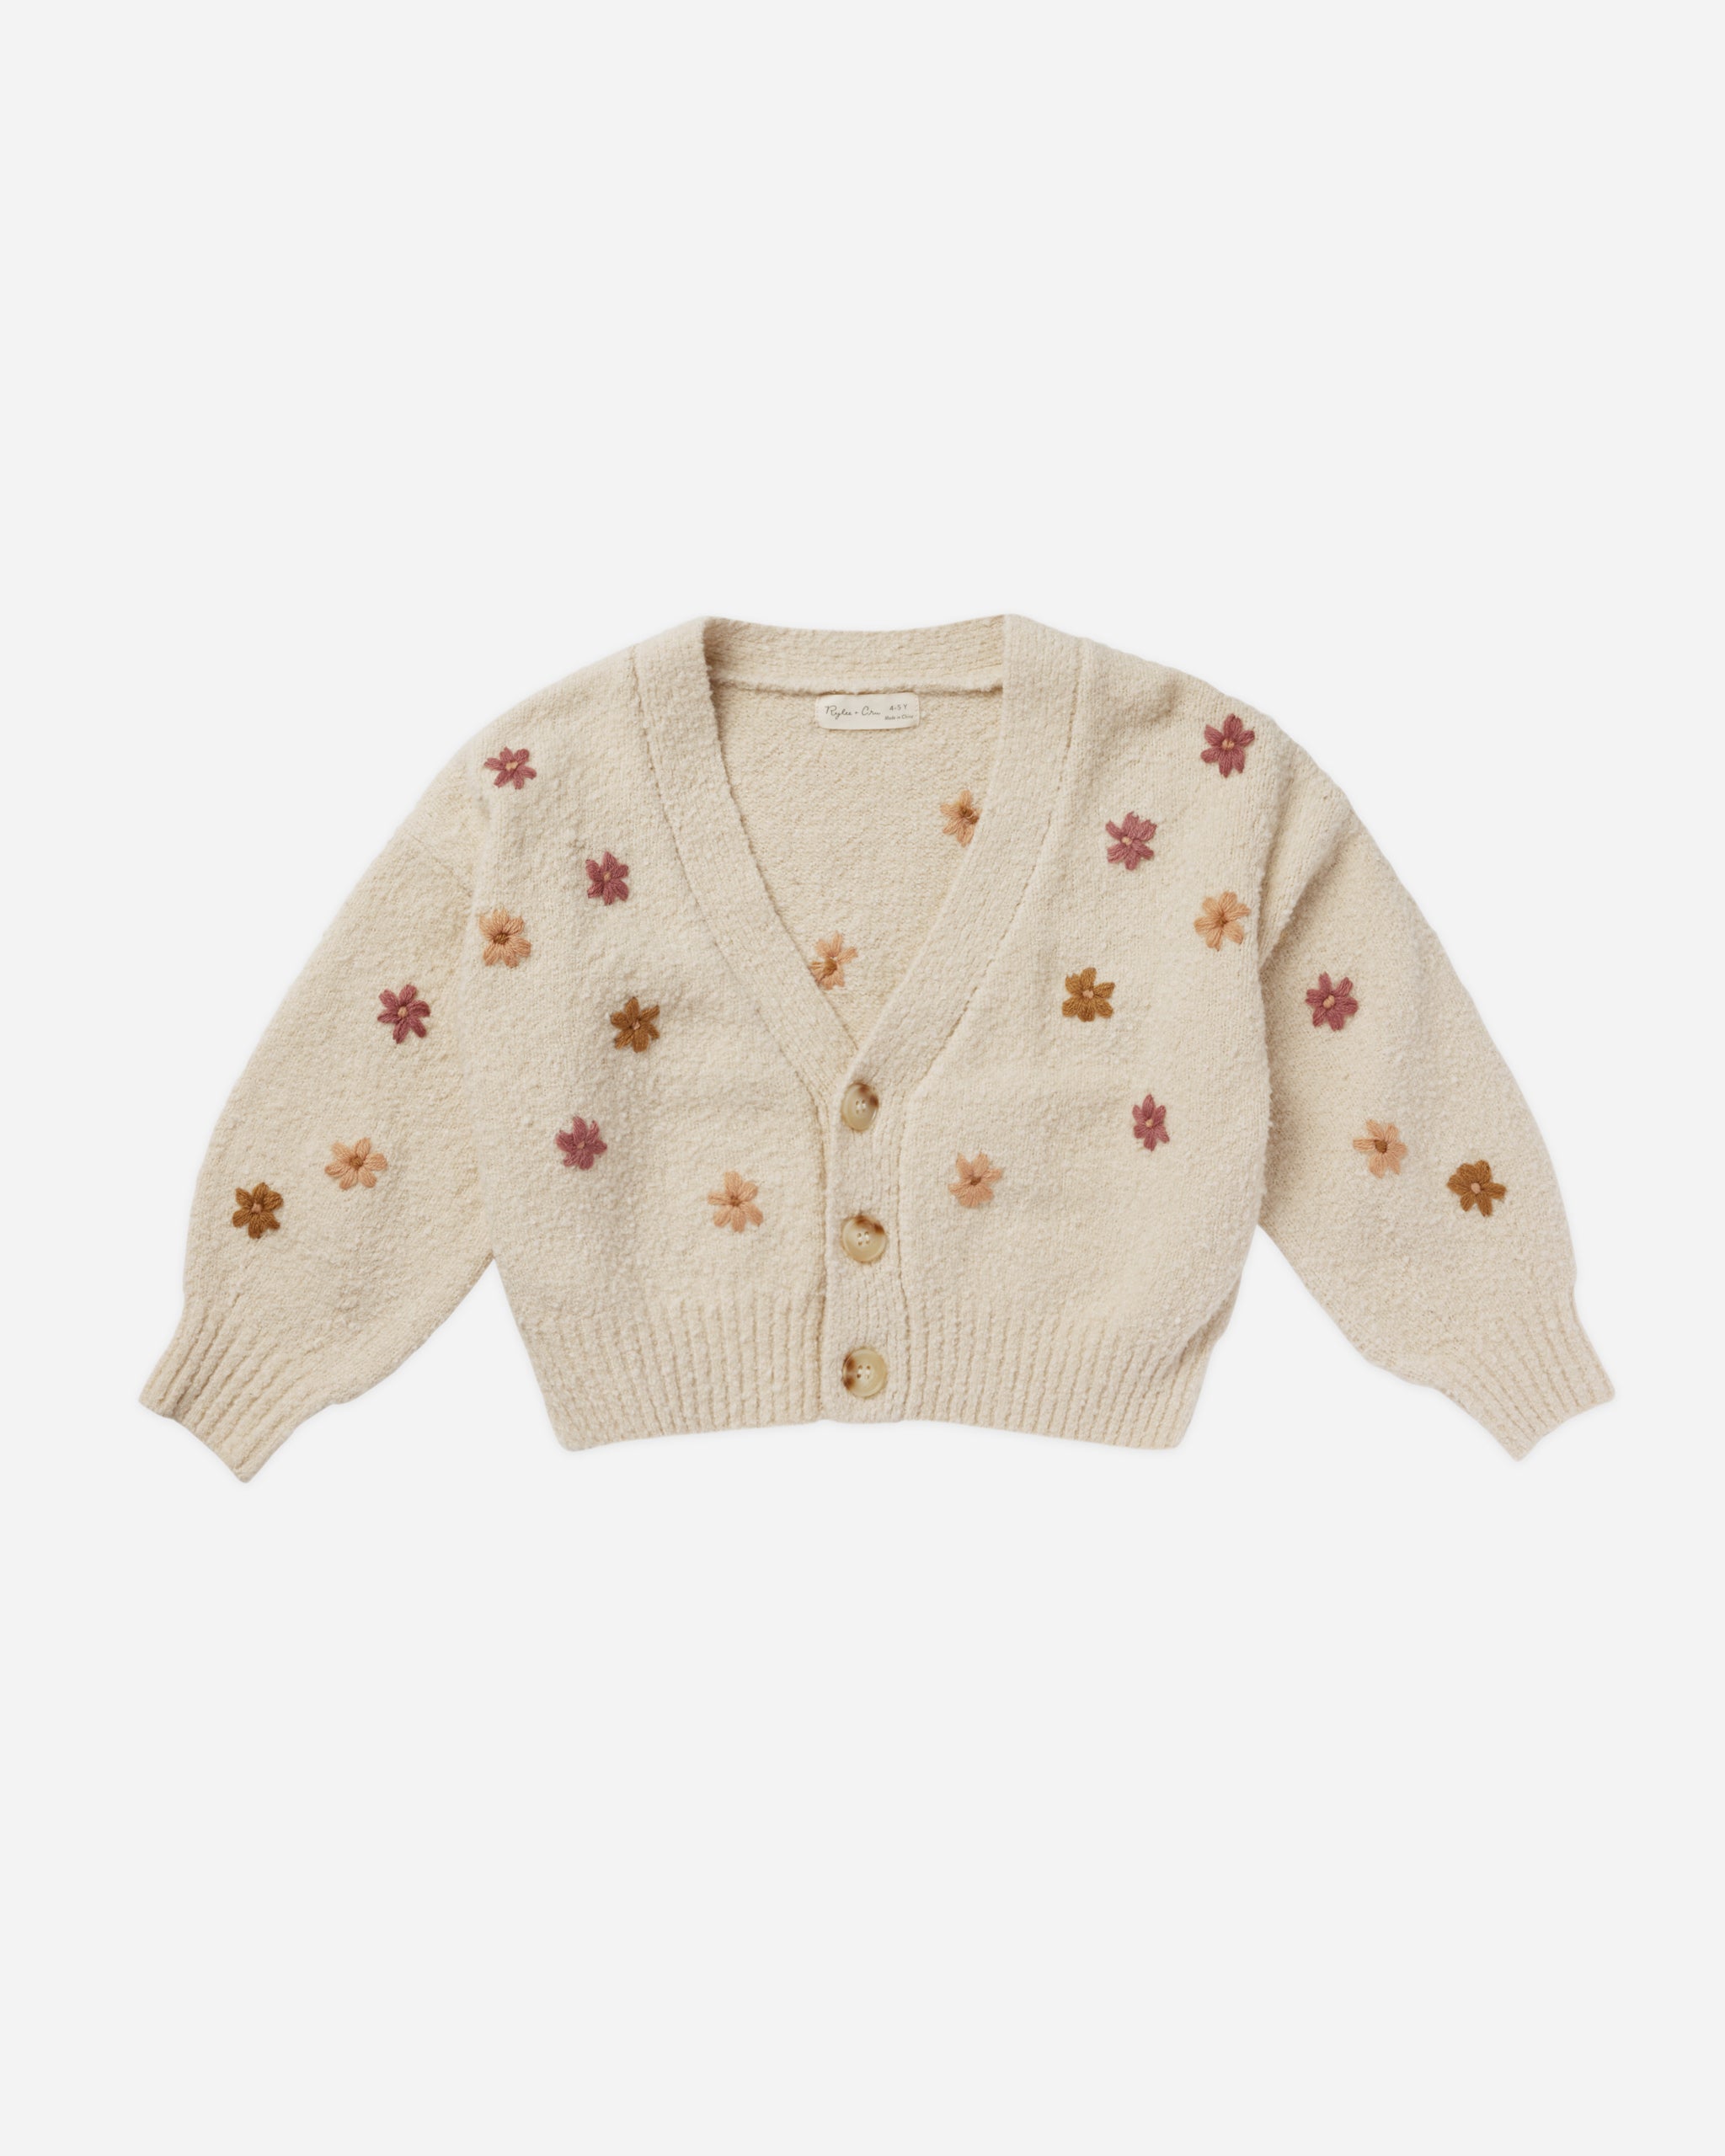 Boxy Crop Cardigan || Fall Flowers - Rylee + Cru | Kids Clothes | Trendy Baby Clothes | Modern Infant Outfits |